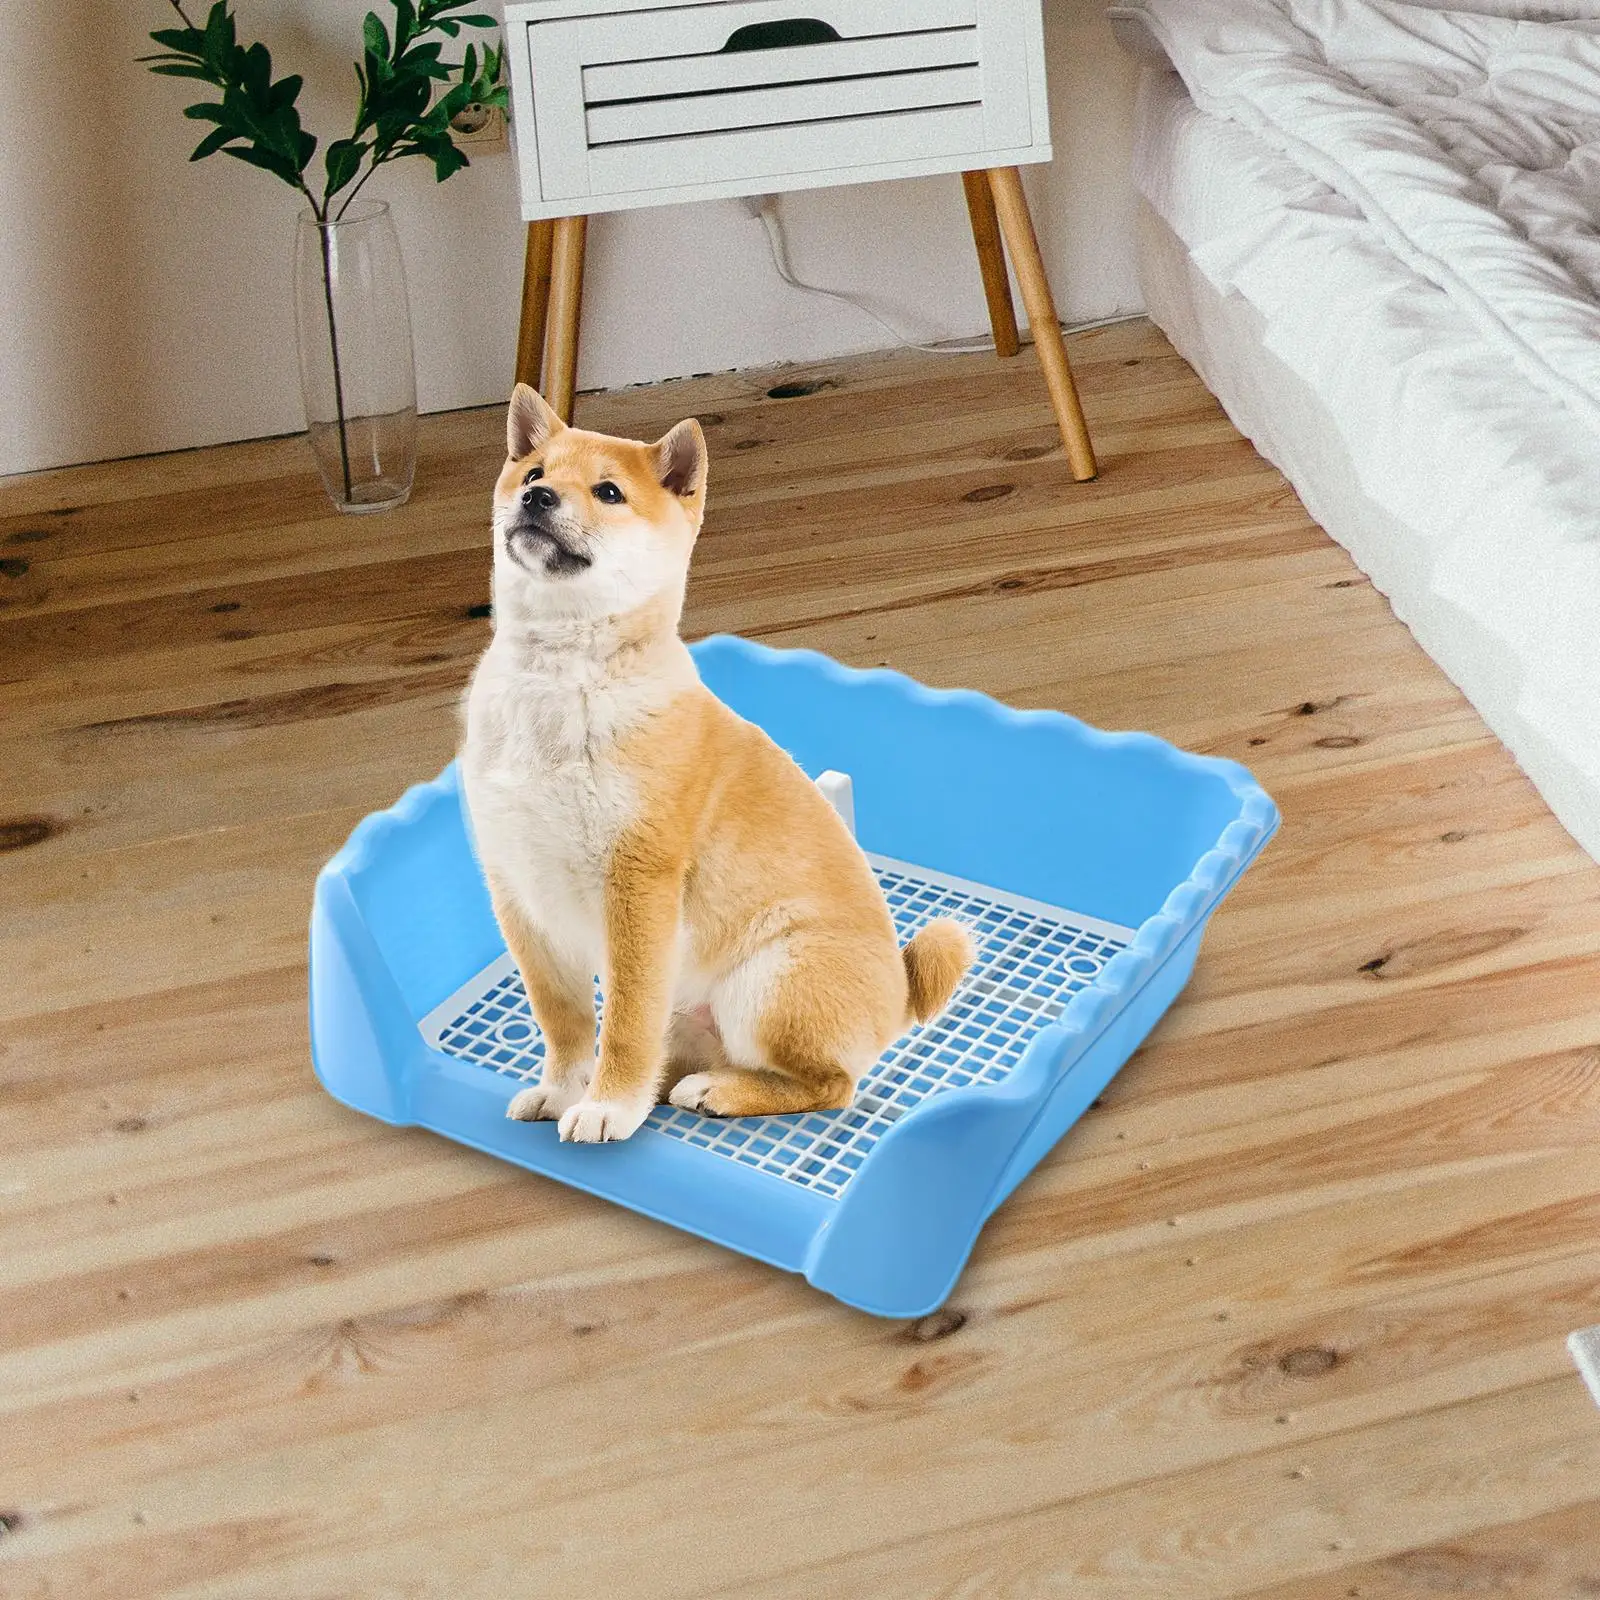 Portable Dog Potty Toilet Pad Non-Slip with Protective  Keep Floors  Toilet for Hamsters Litter Boxes Cats